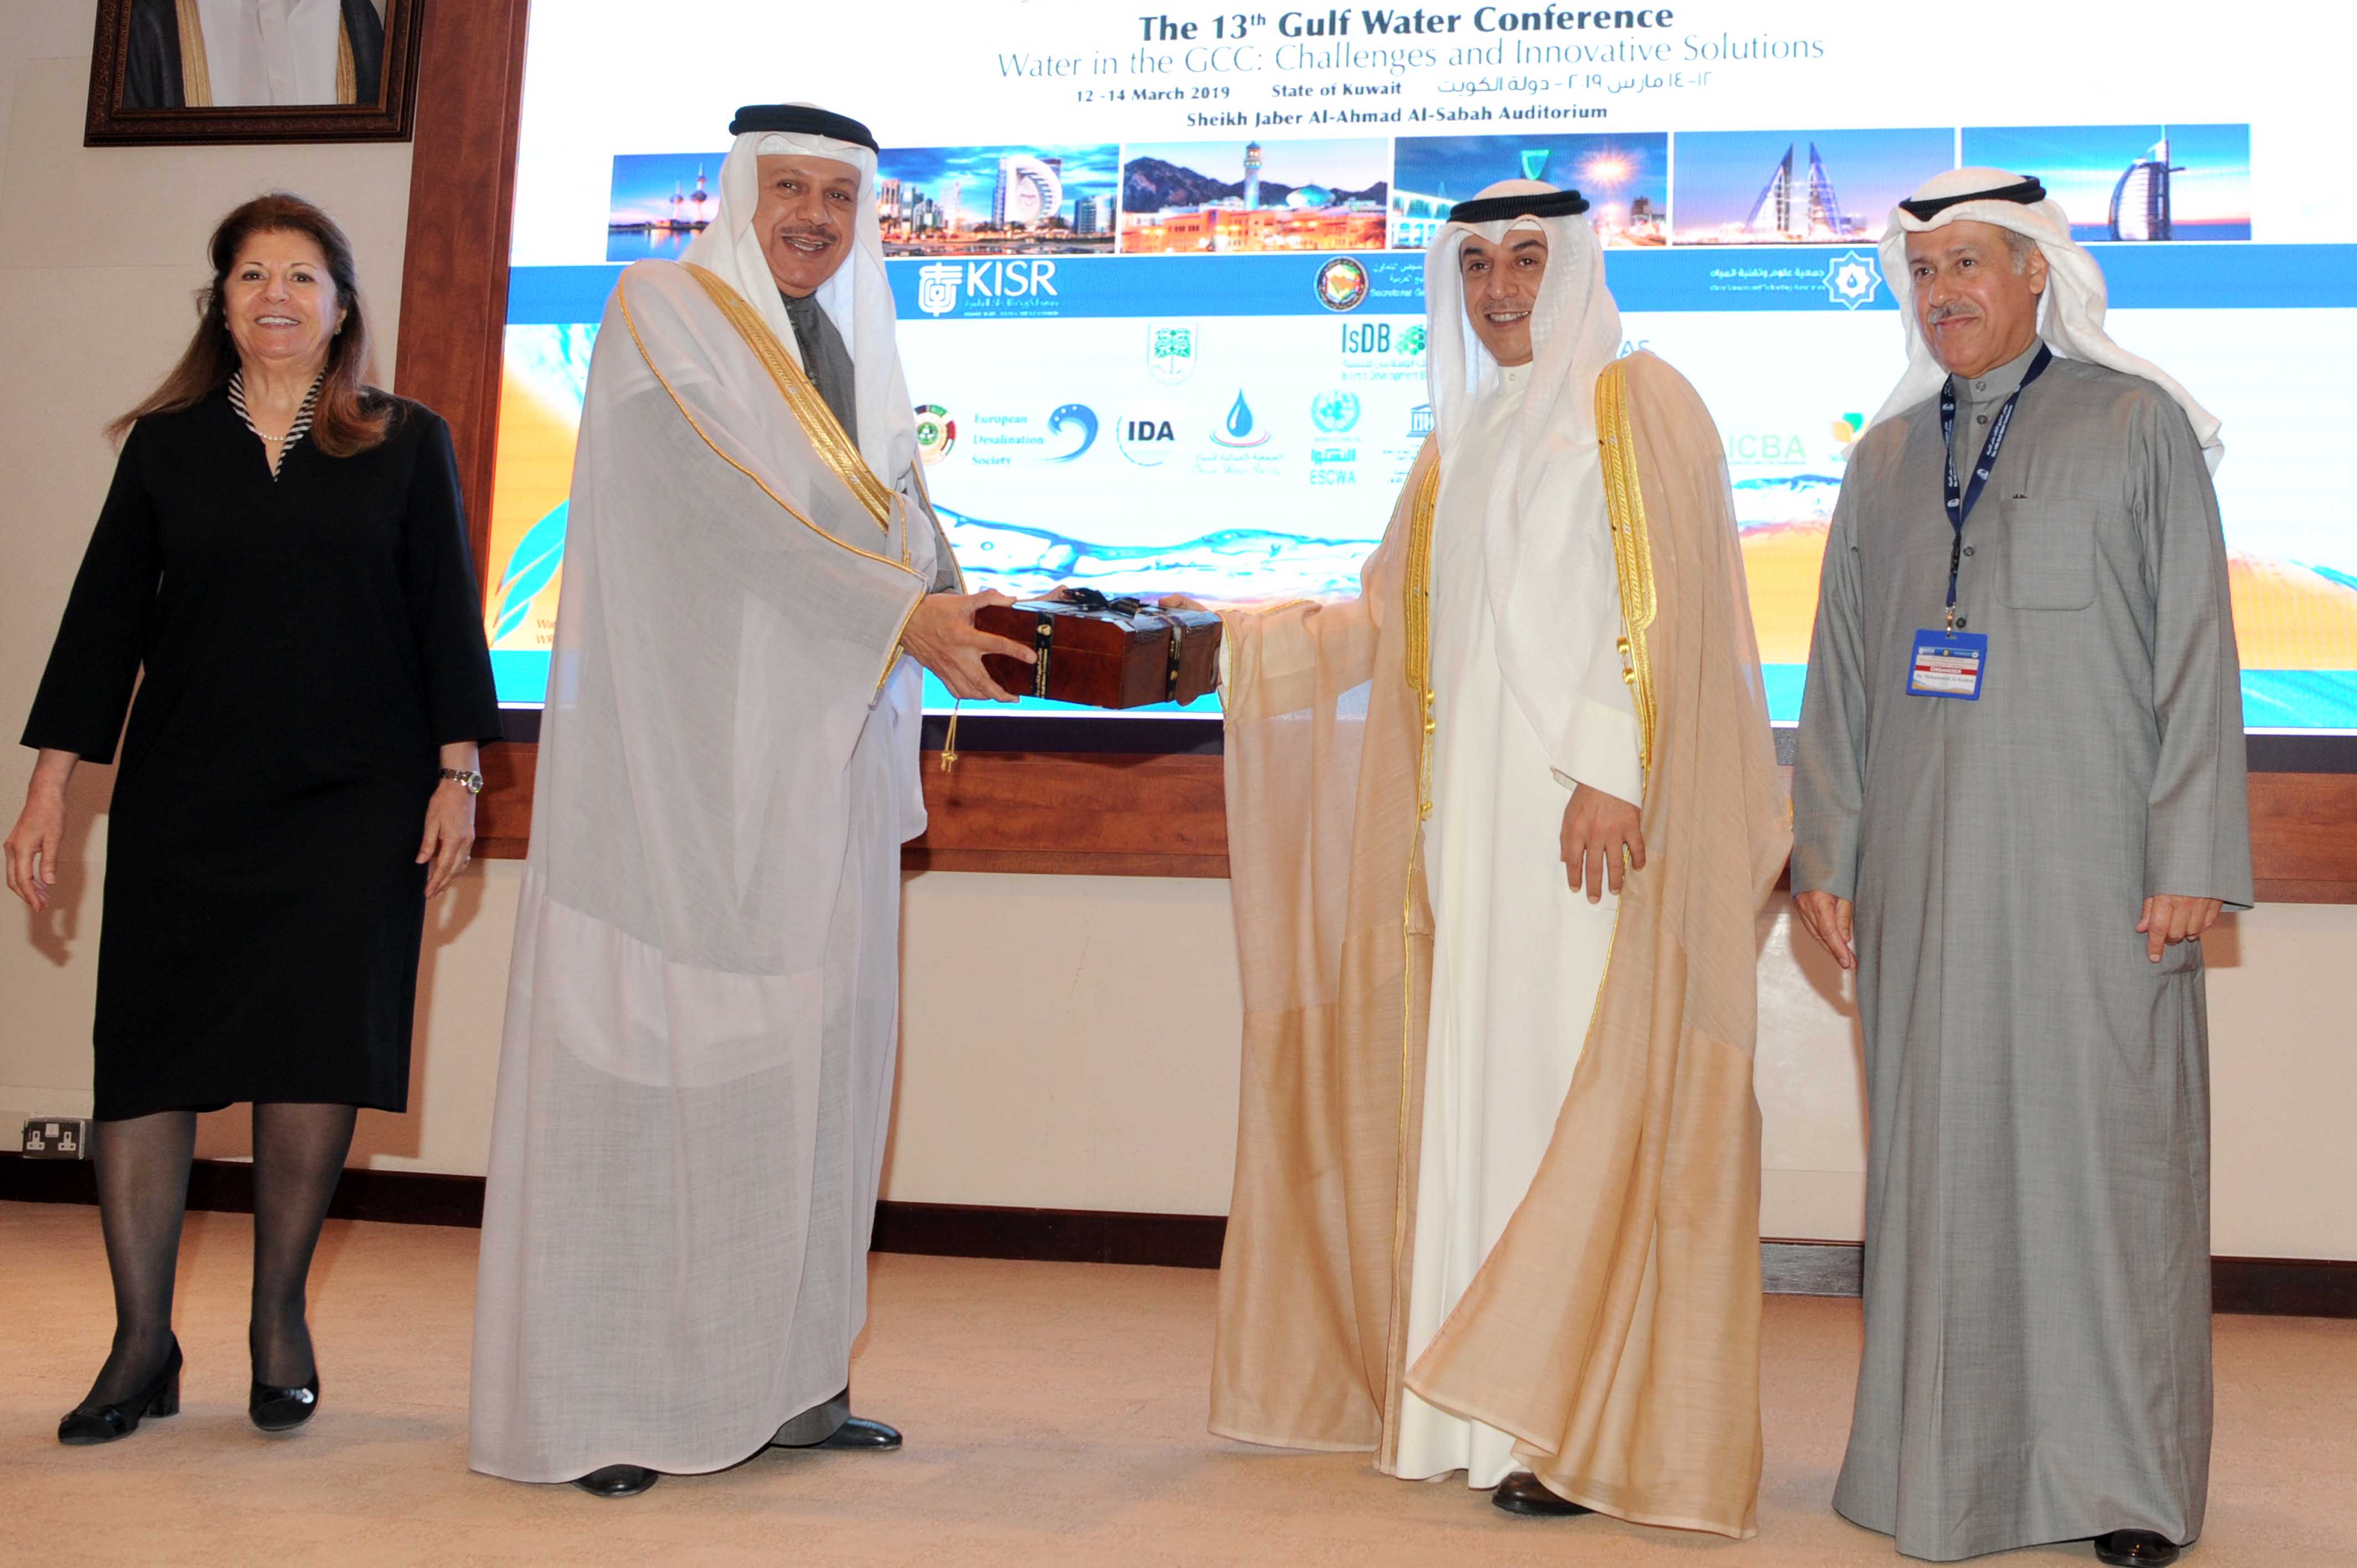 The 13th Gulf Water Conference